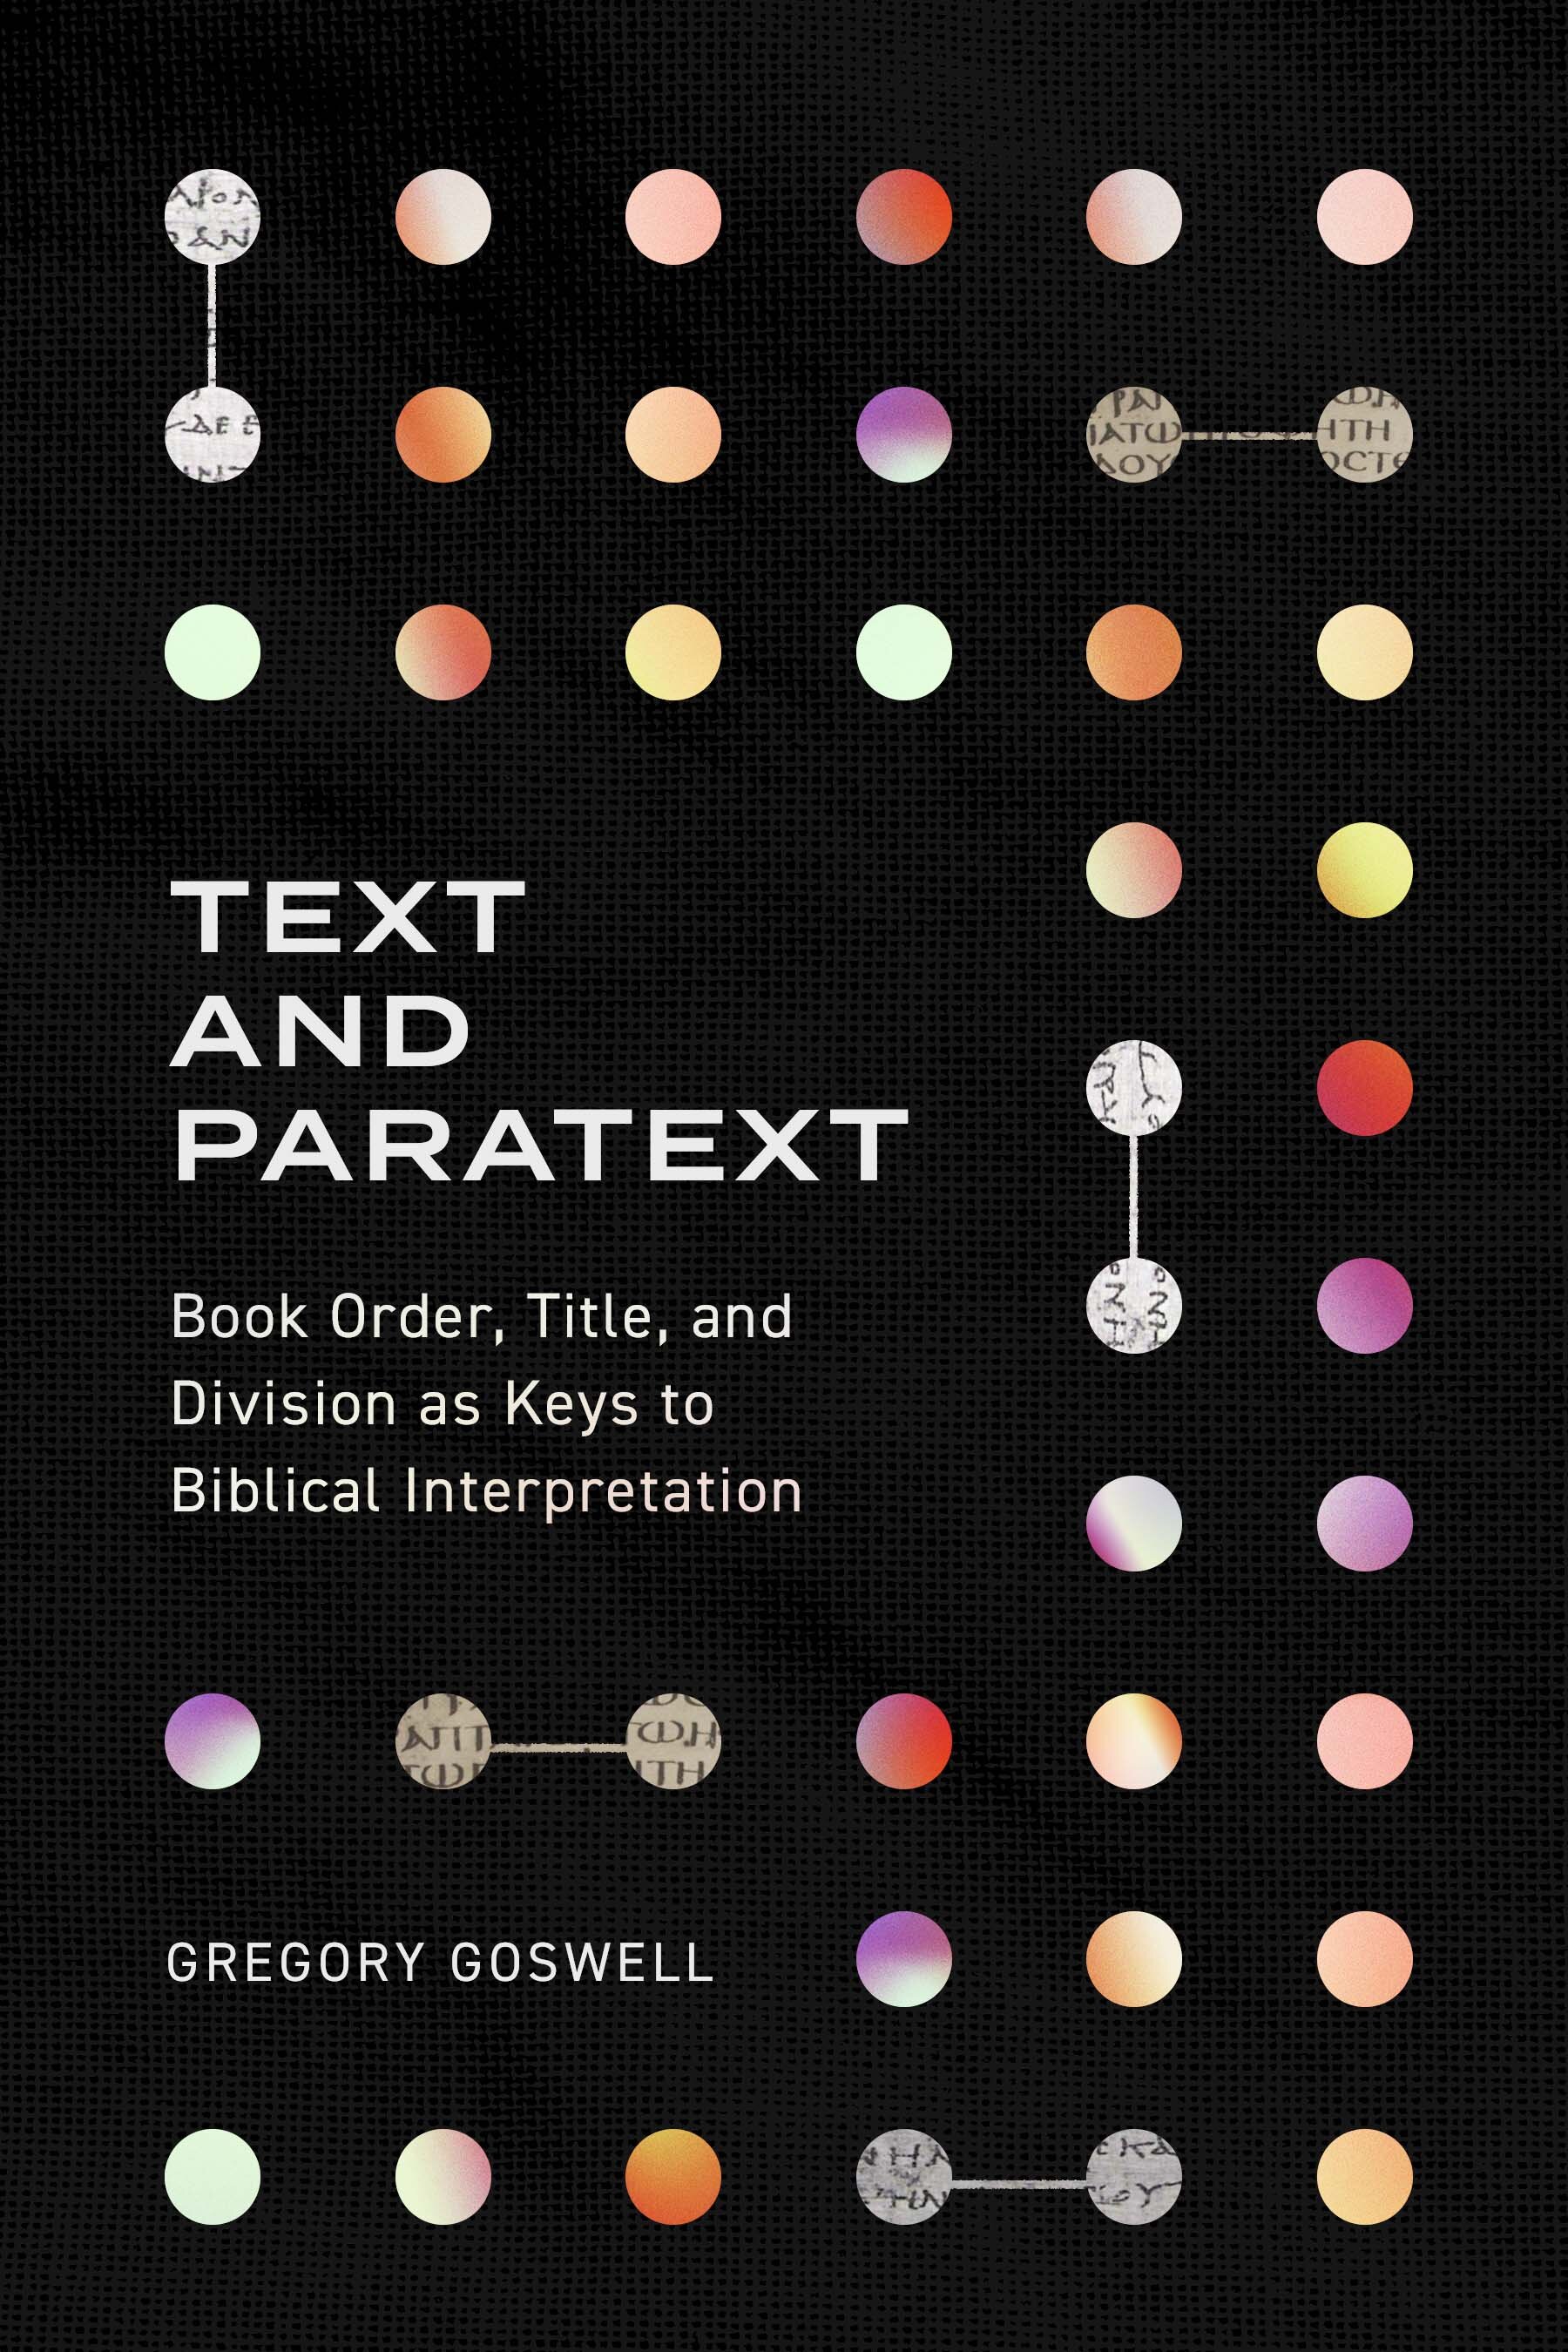 Text and Paratext: Book Order, Title, and Division as Keys to Biblical Interpretation